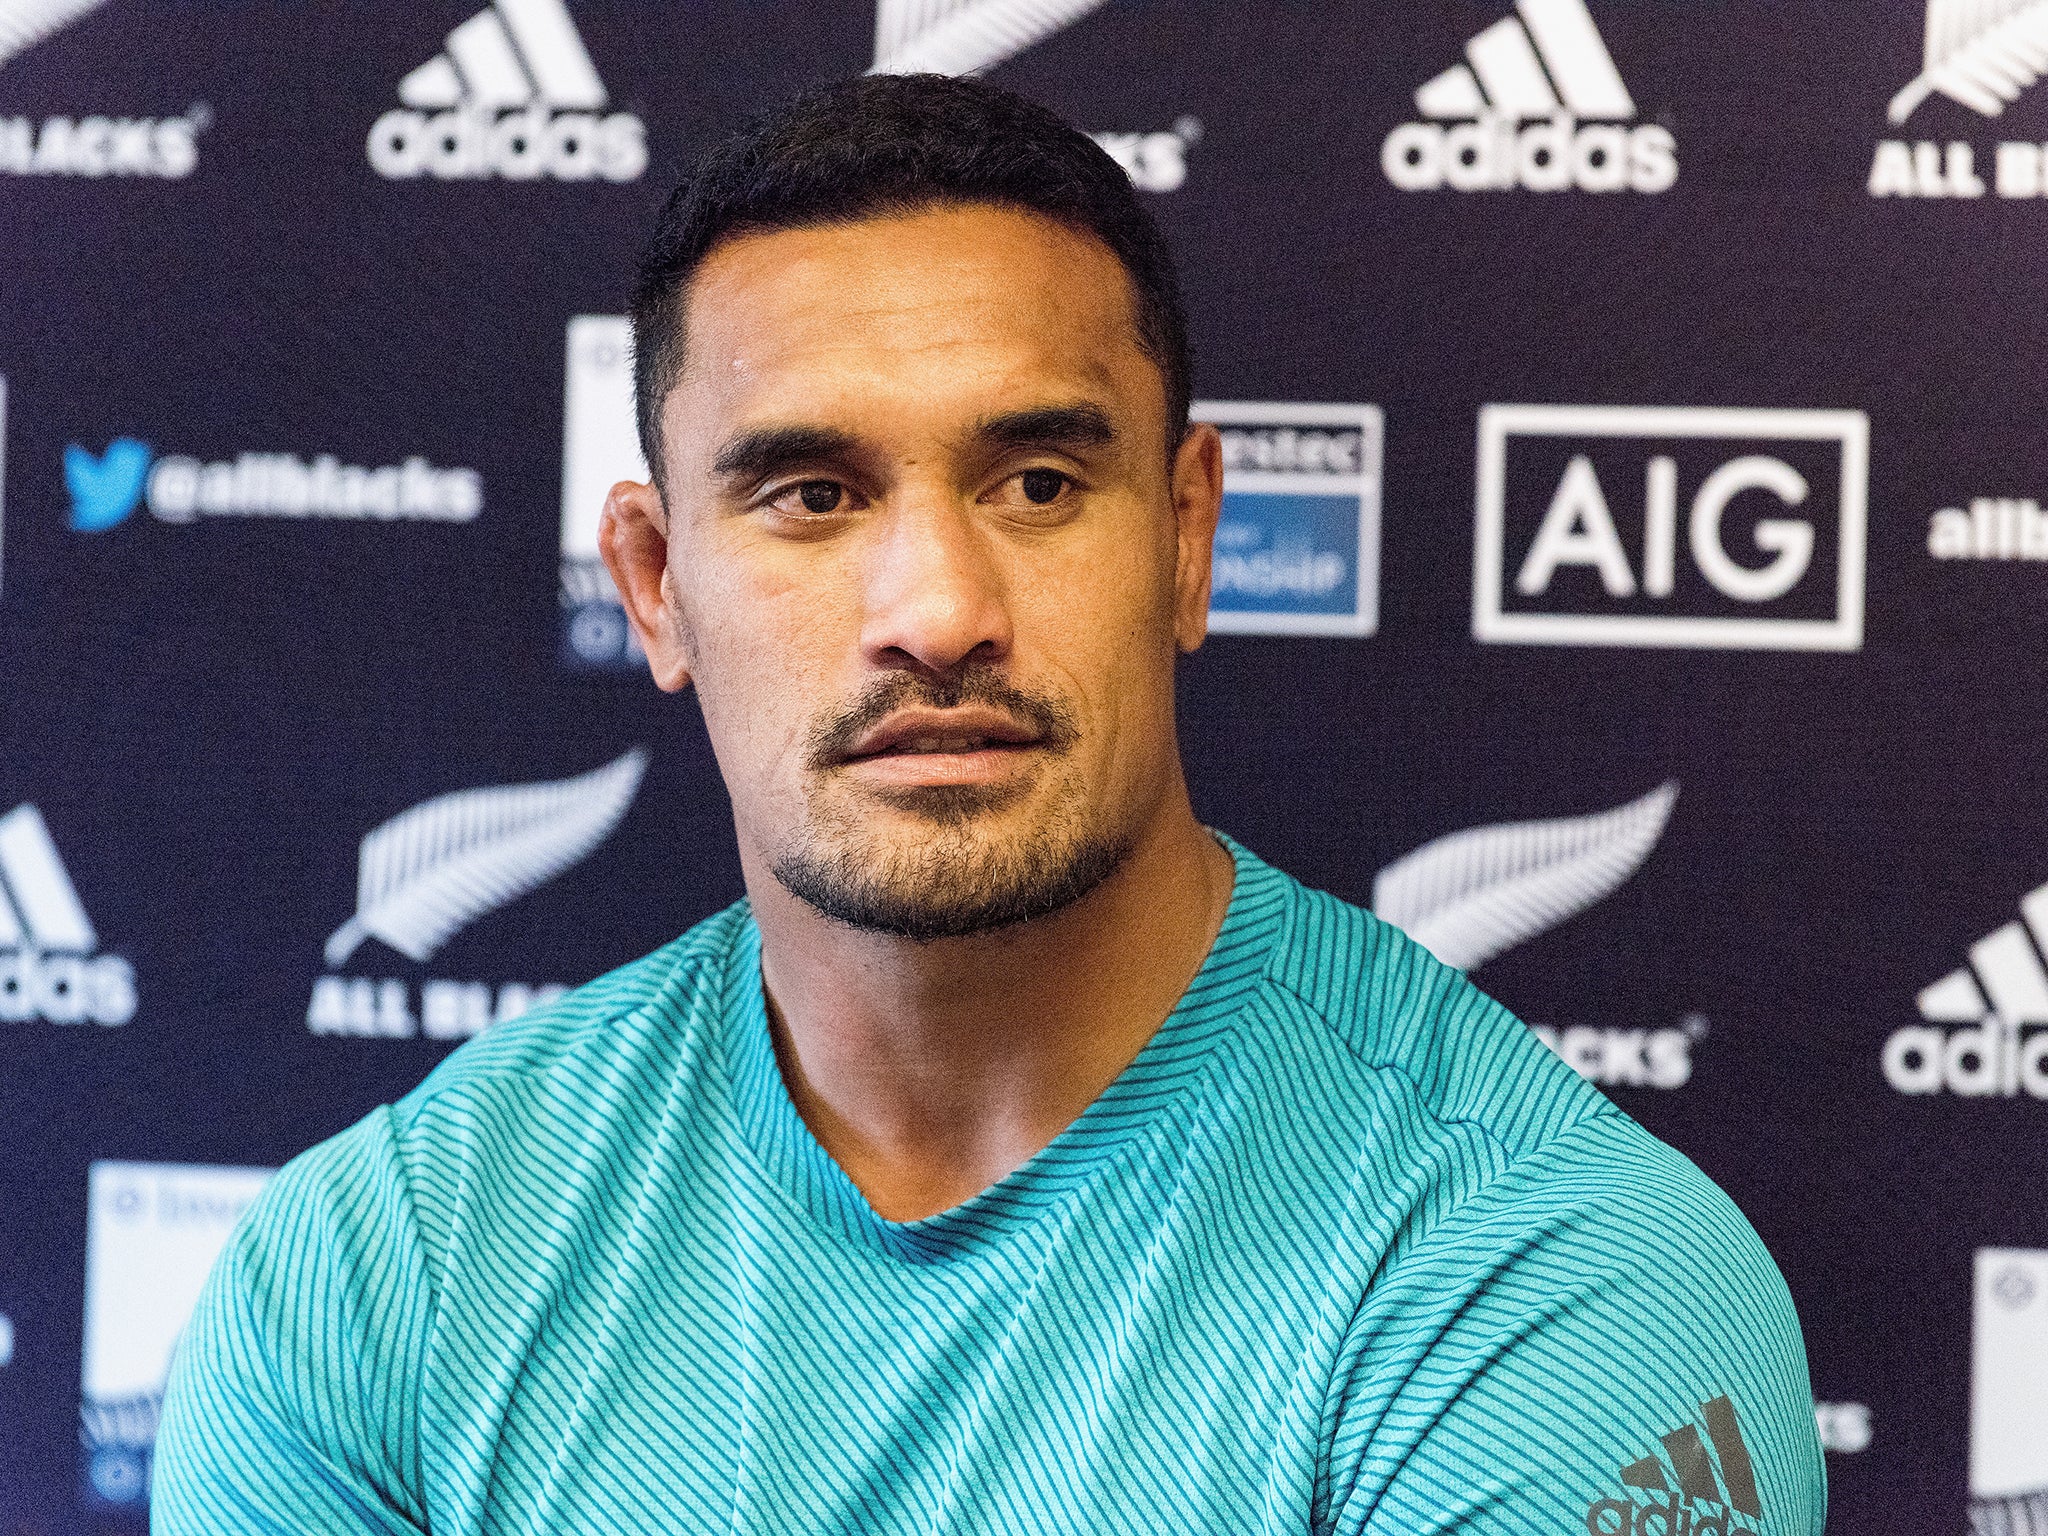 Jerome Kaino has left the All Blacks camp after allegations about his private life were made in the Australian media